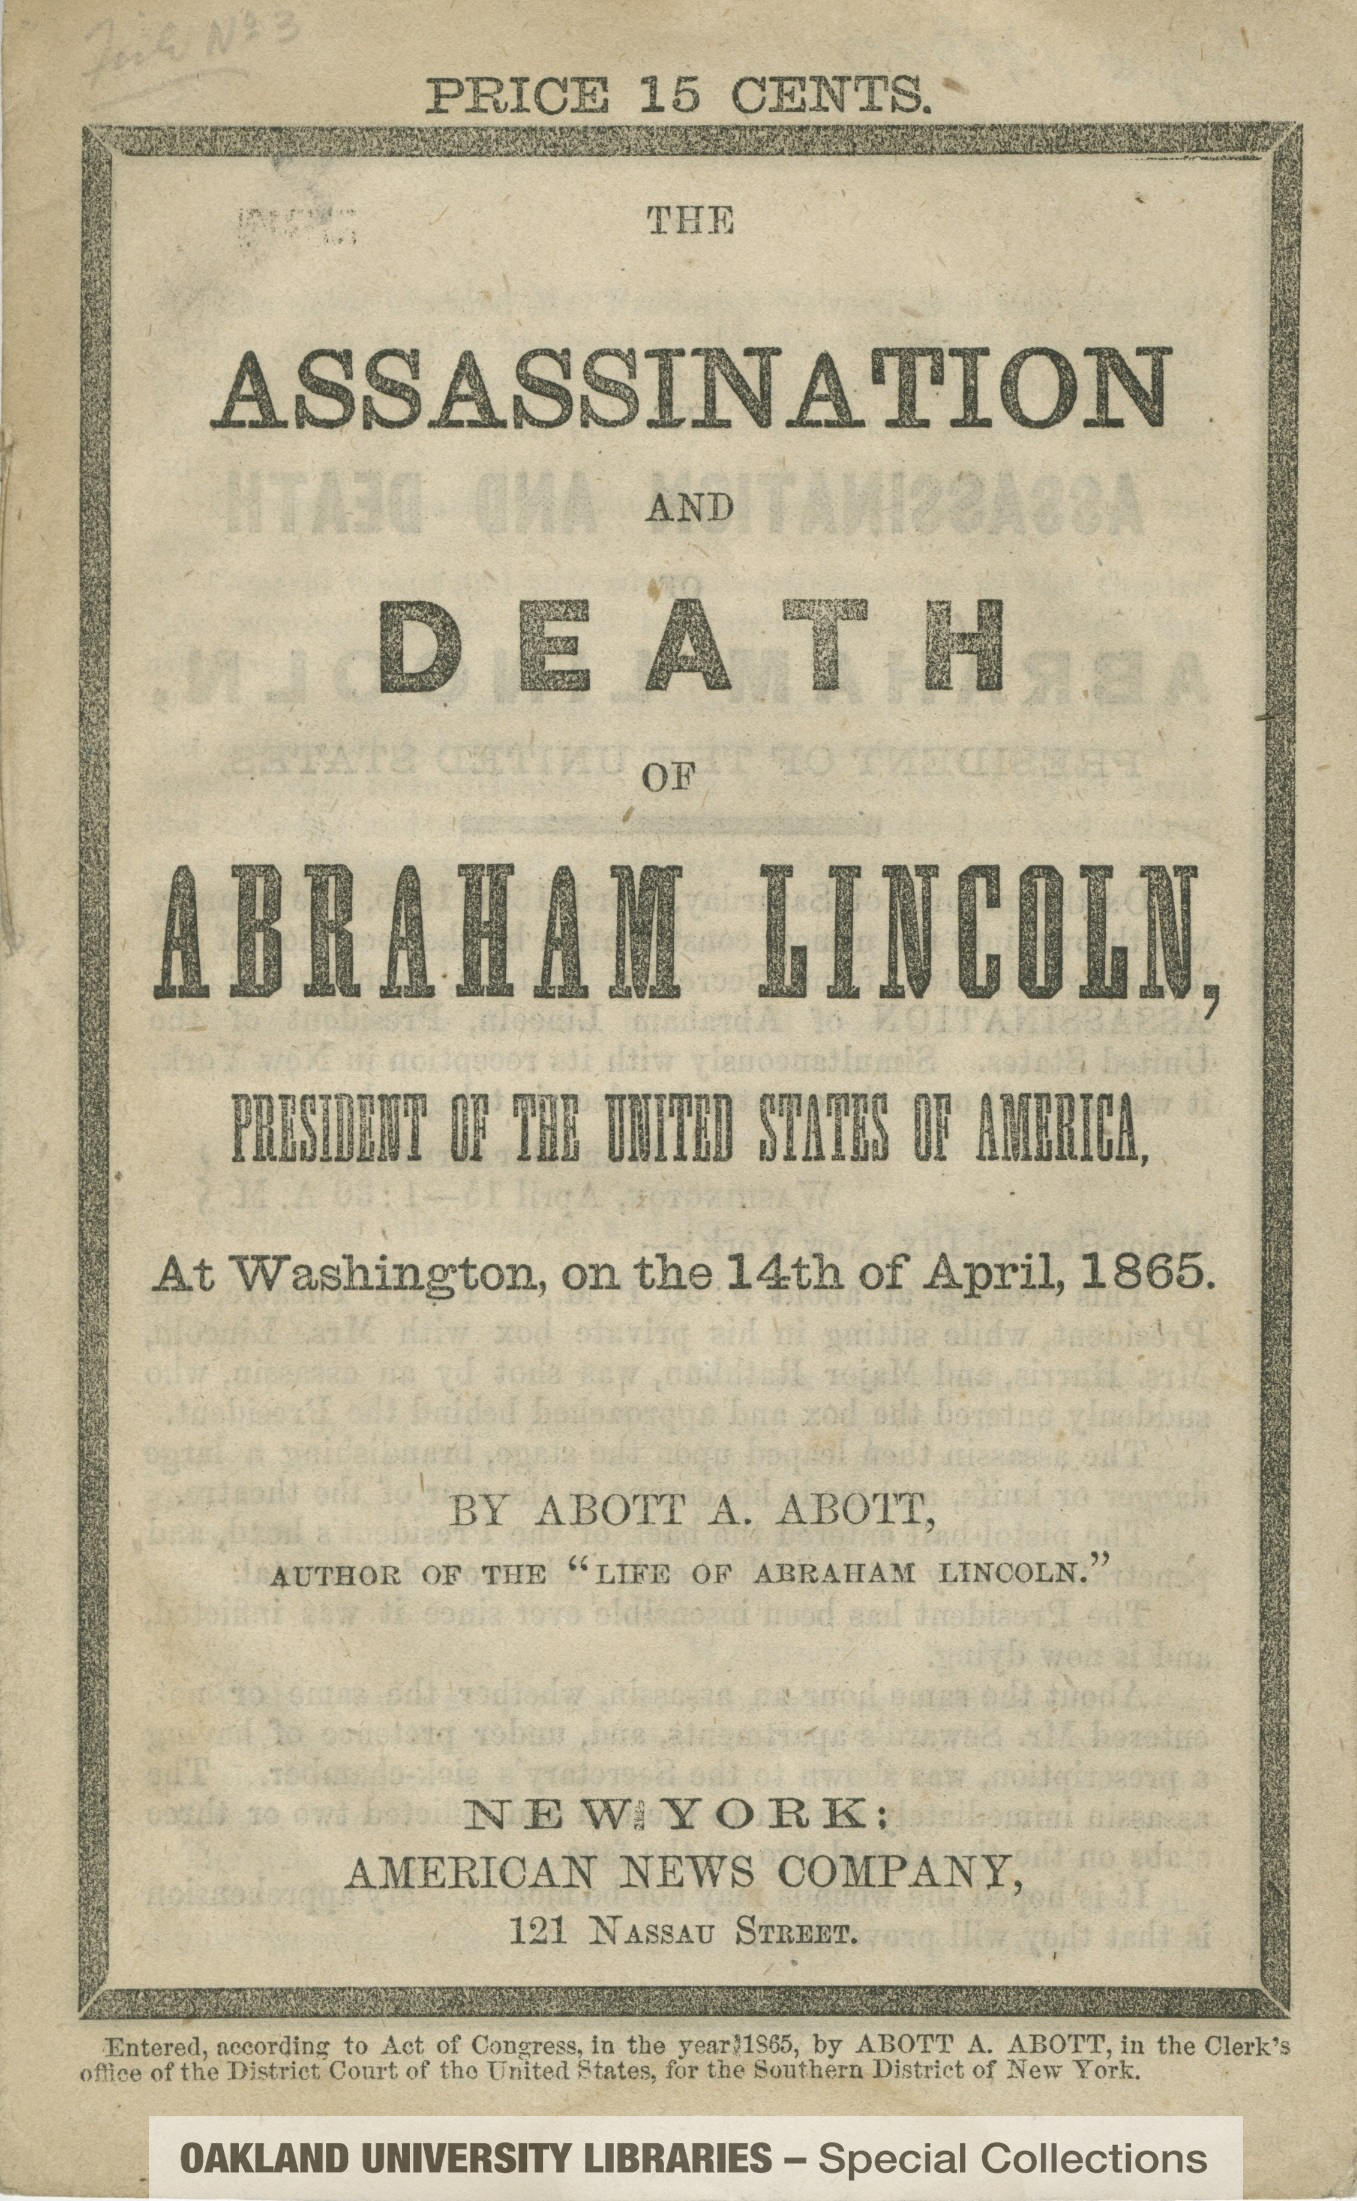 How did the assassination of Abraham Lincoln affect Reconstruction?